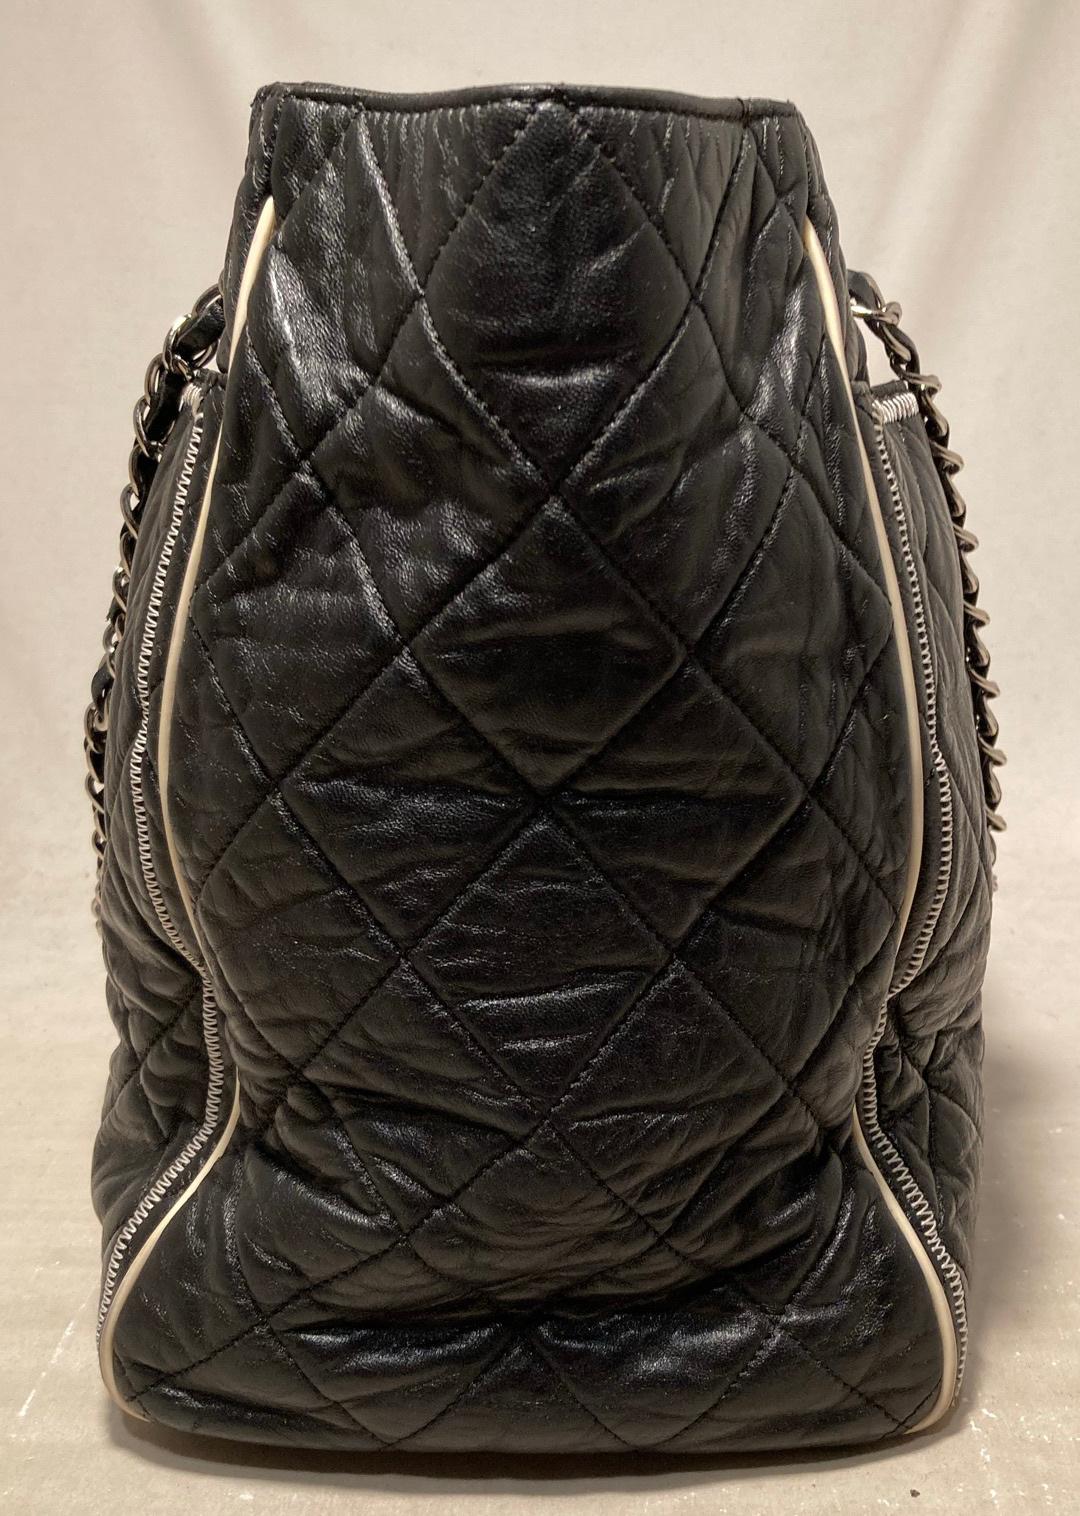 Chanel Black Leather Mademoiselle Lock Front East West Tote in excellent condition. Quilted black lambskin leather exterior trimmed with cream leather piping and silver hardware. Woven leather and chain double shoulder straps can be worn short or